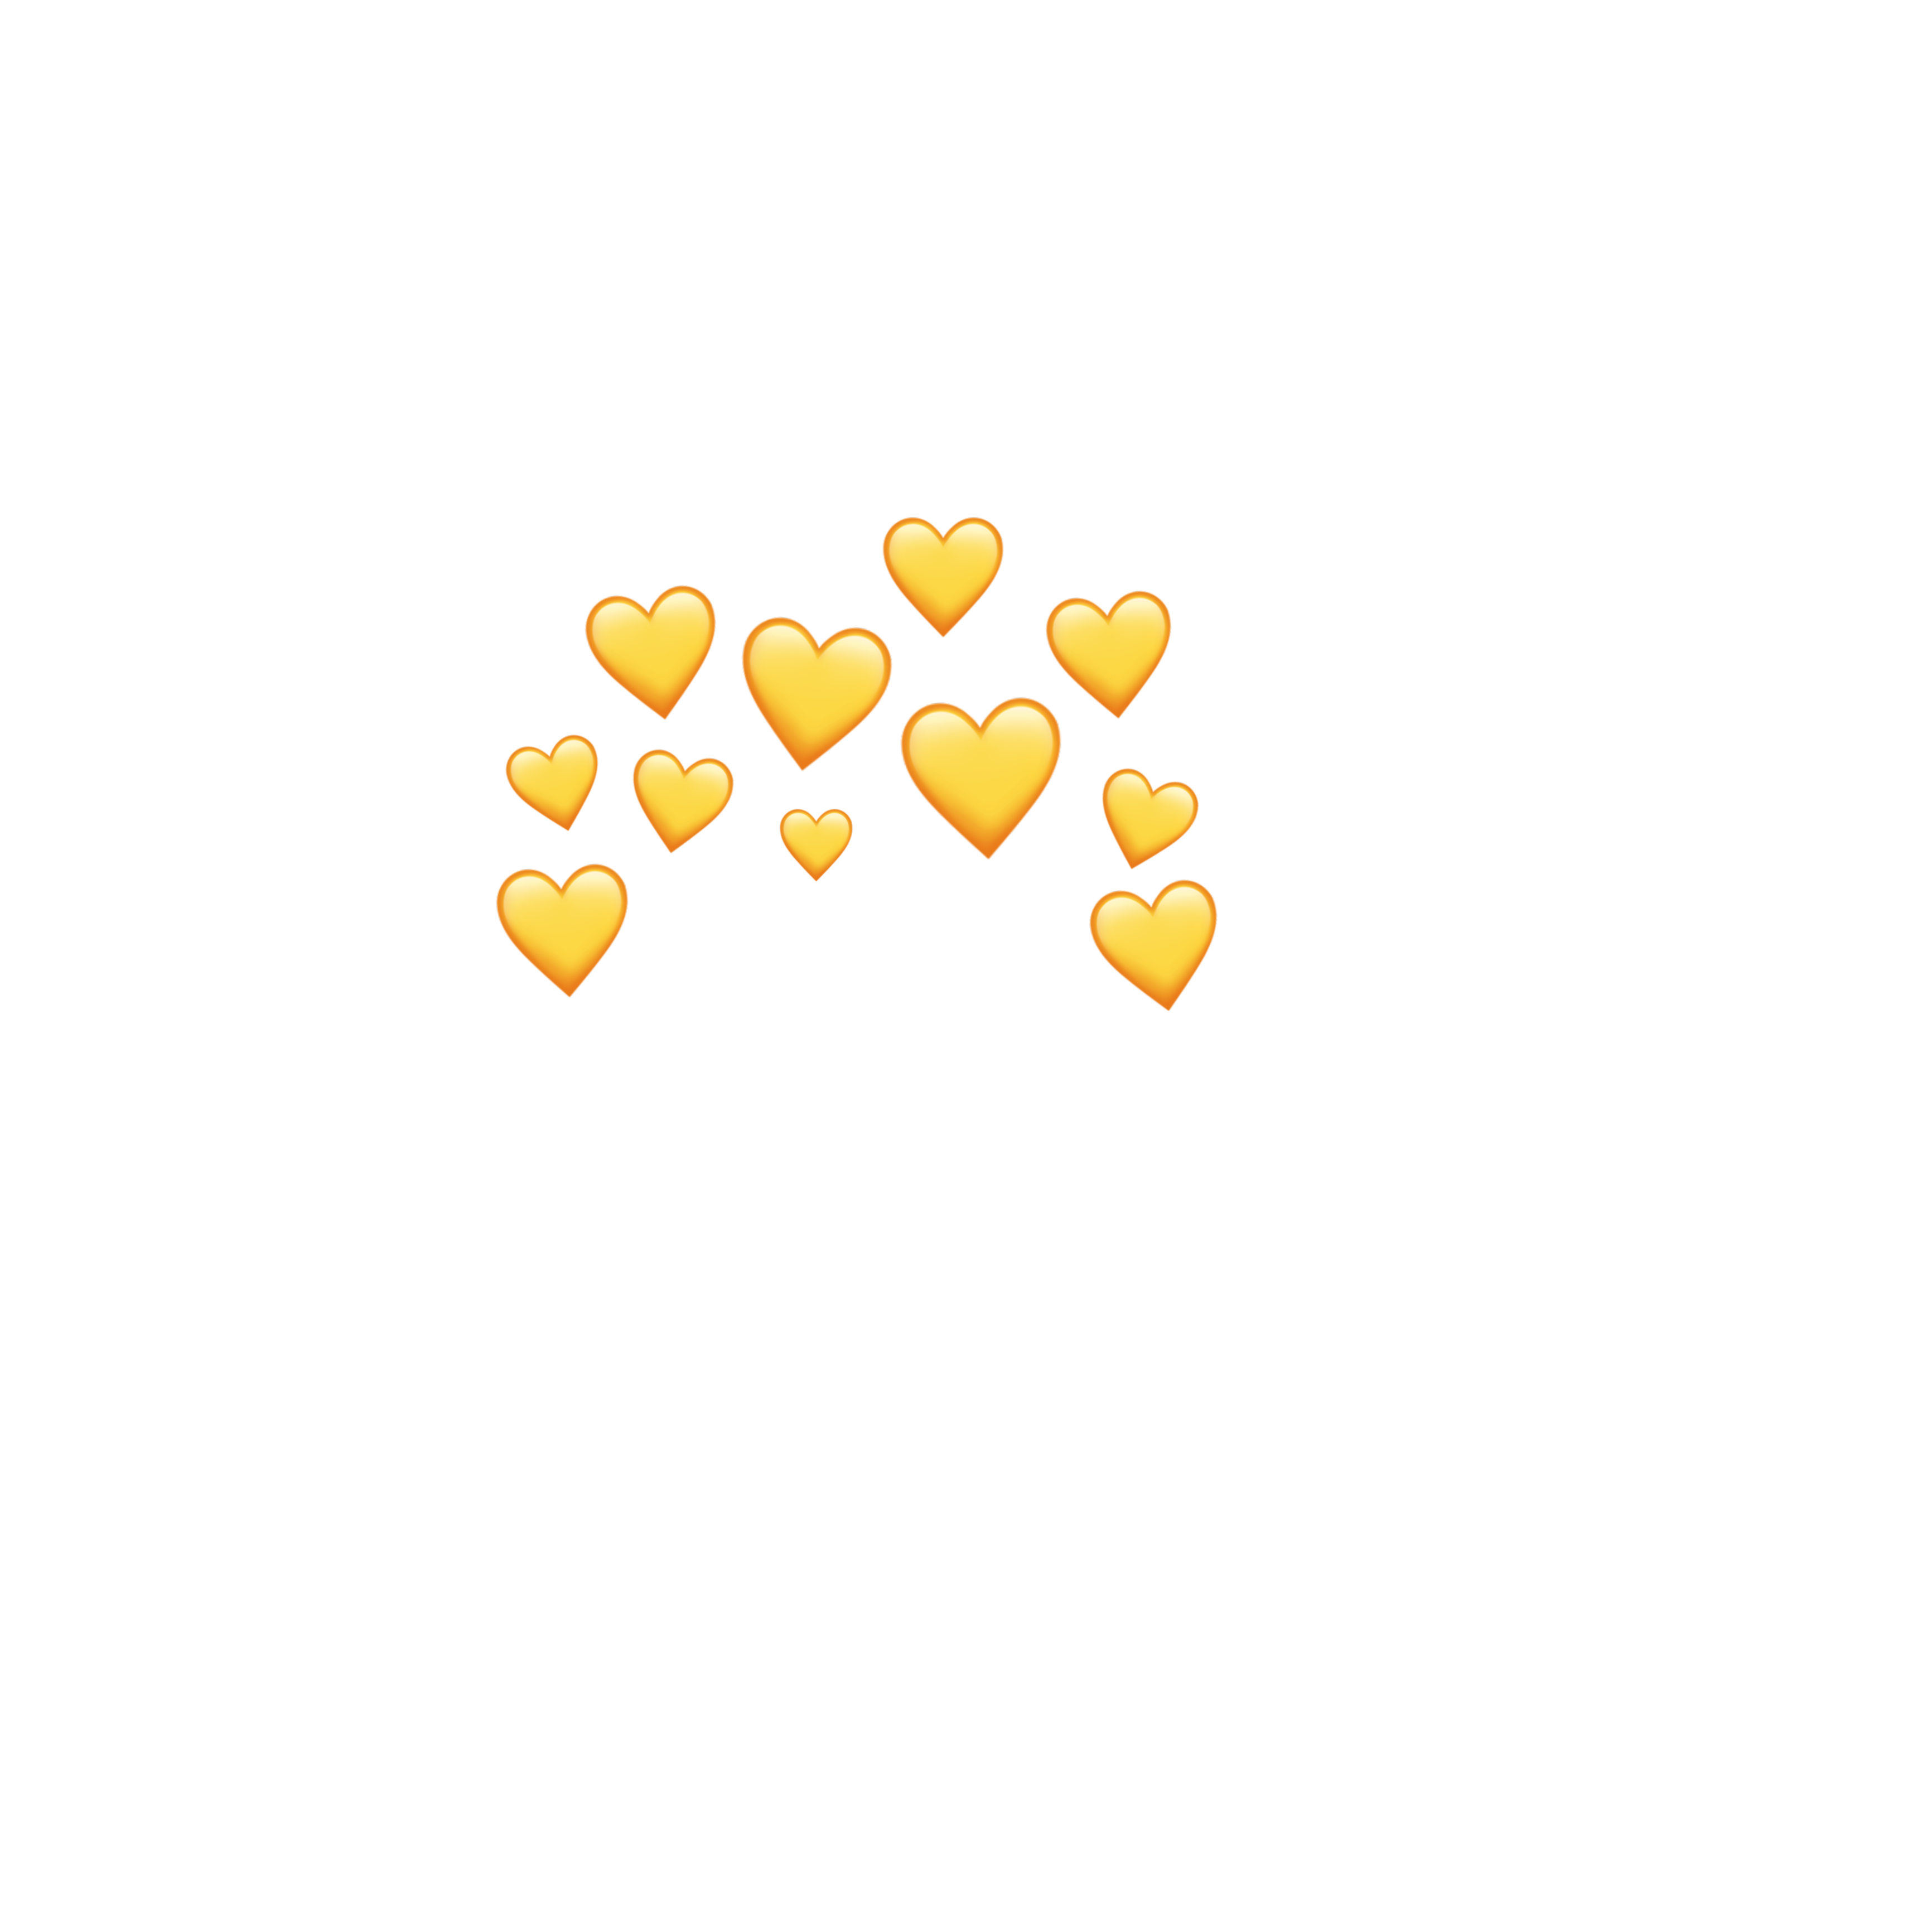 Aesthetic Yellow Hearts Png - Largest Wallpaper Portal